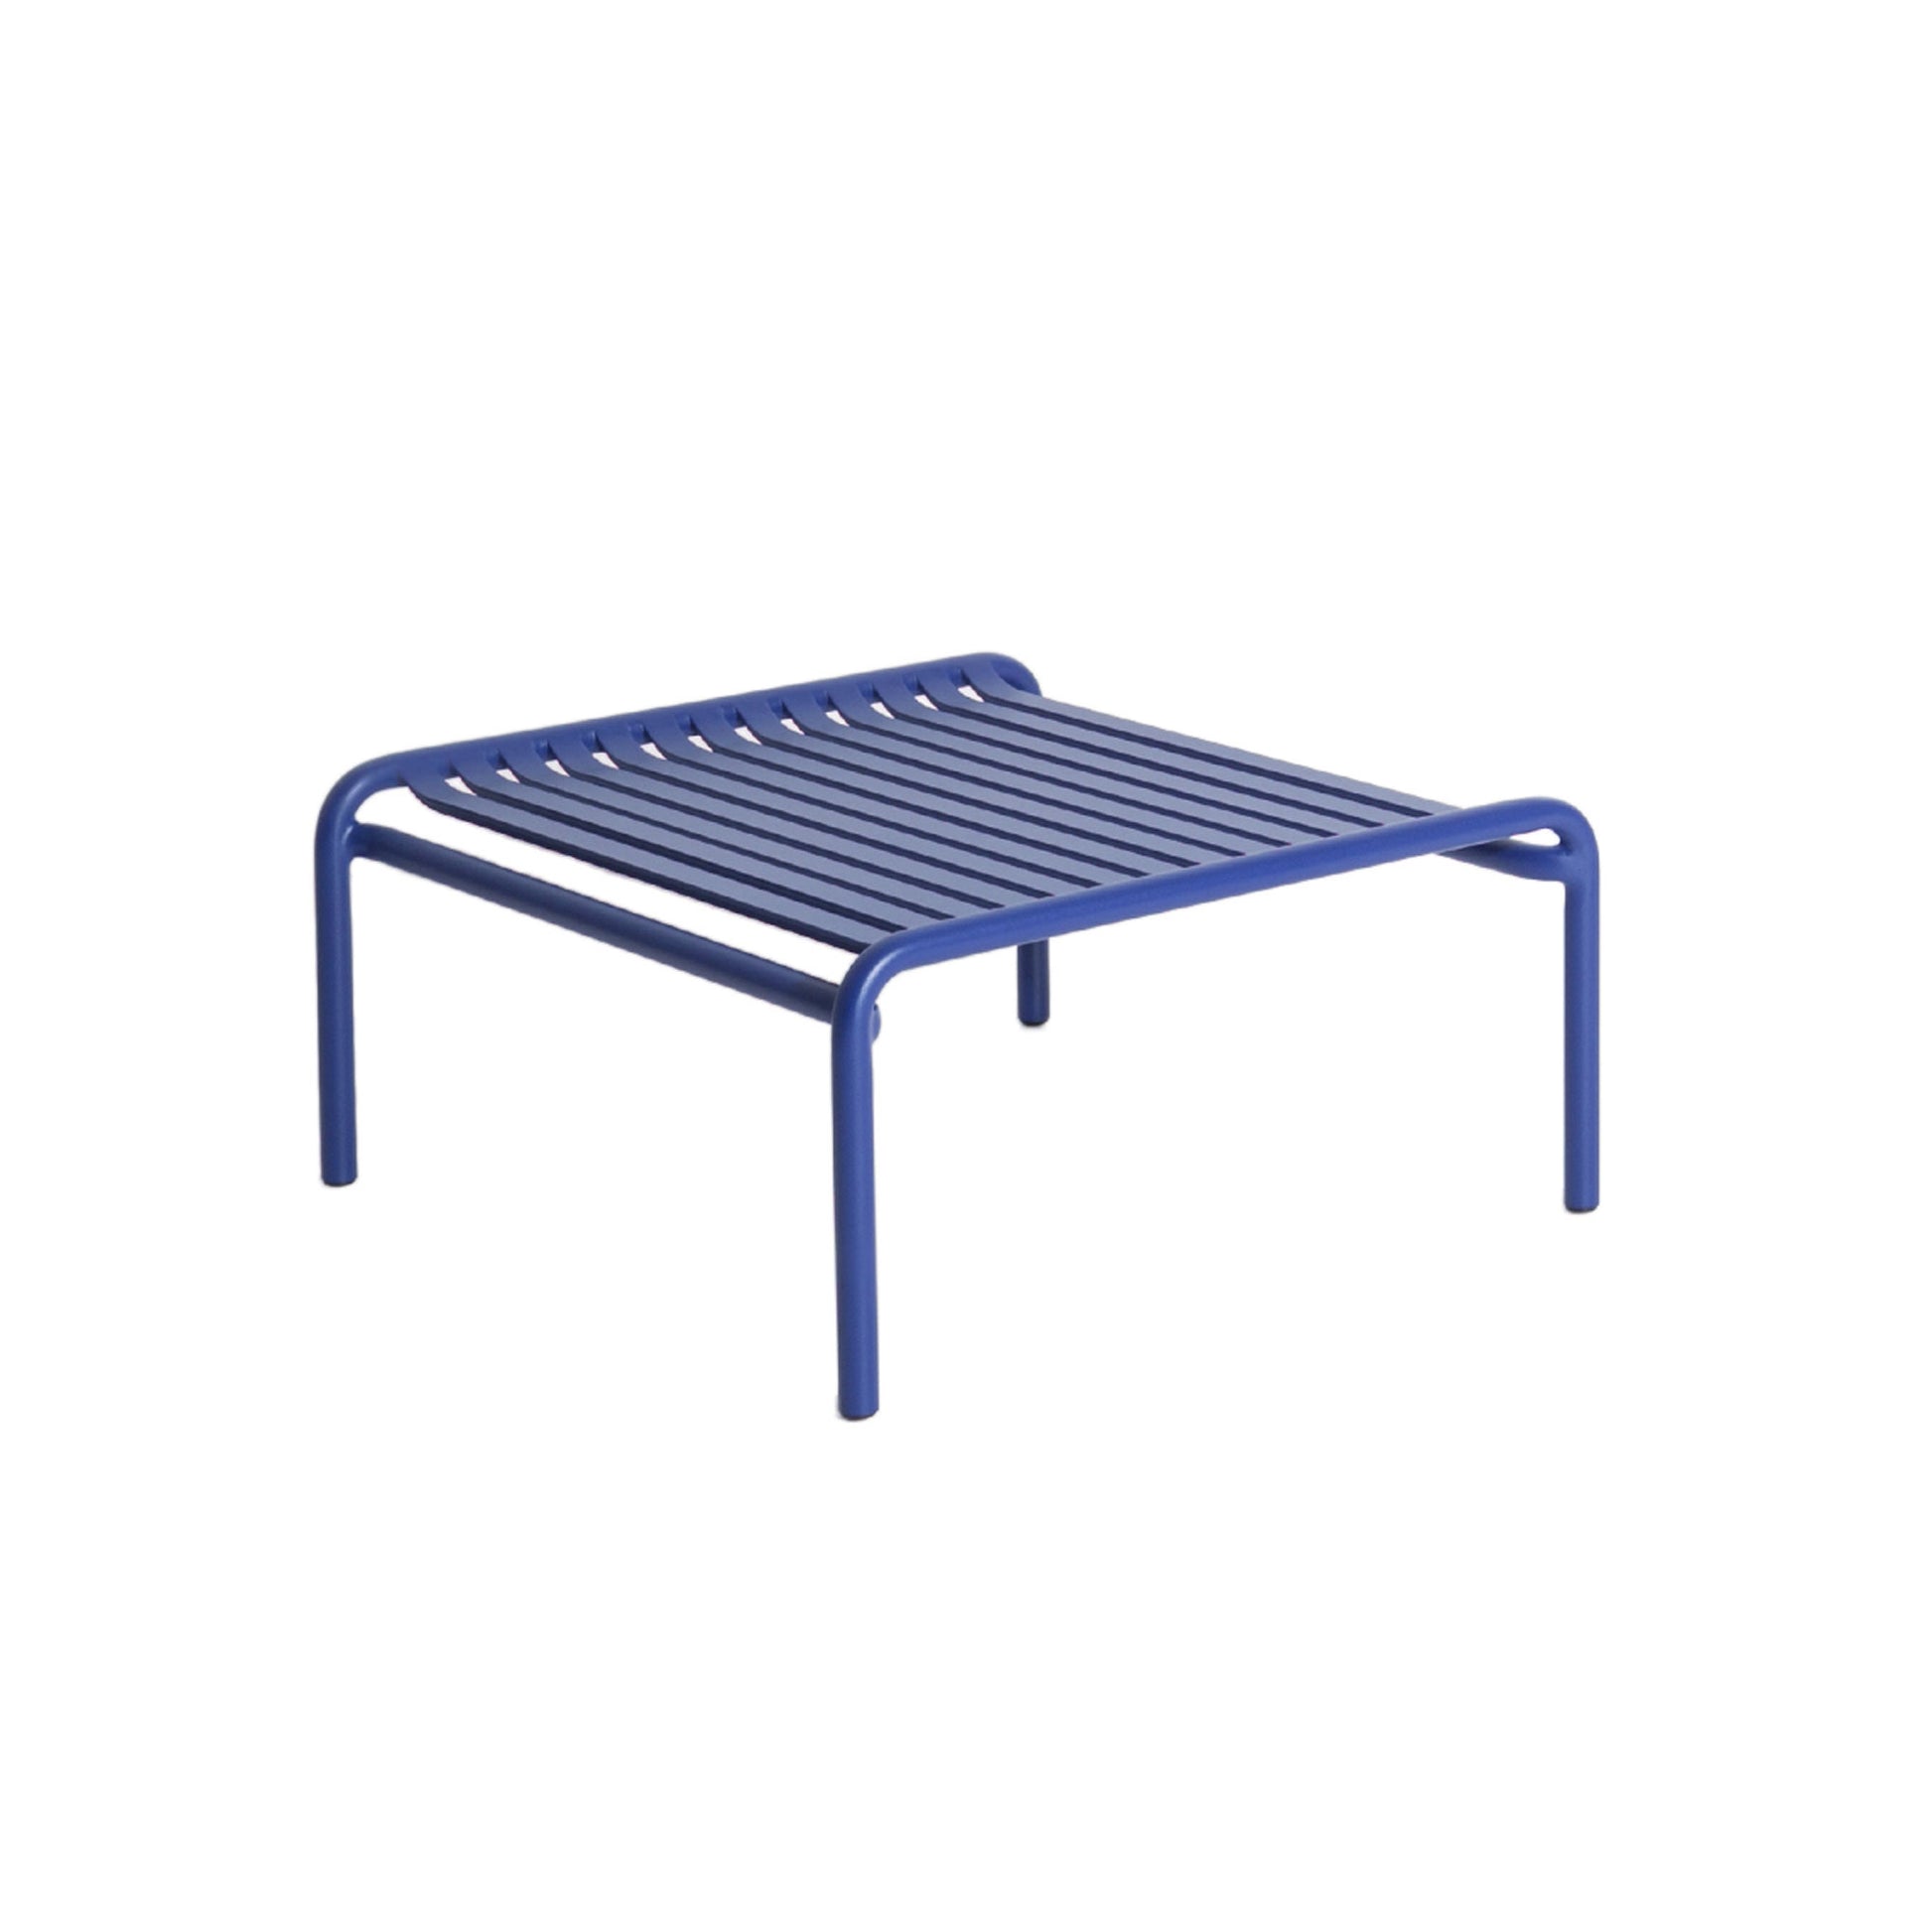 WEEK-END Coffee Table by Petite Friture #Blue